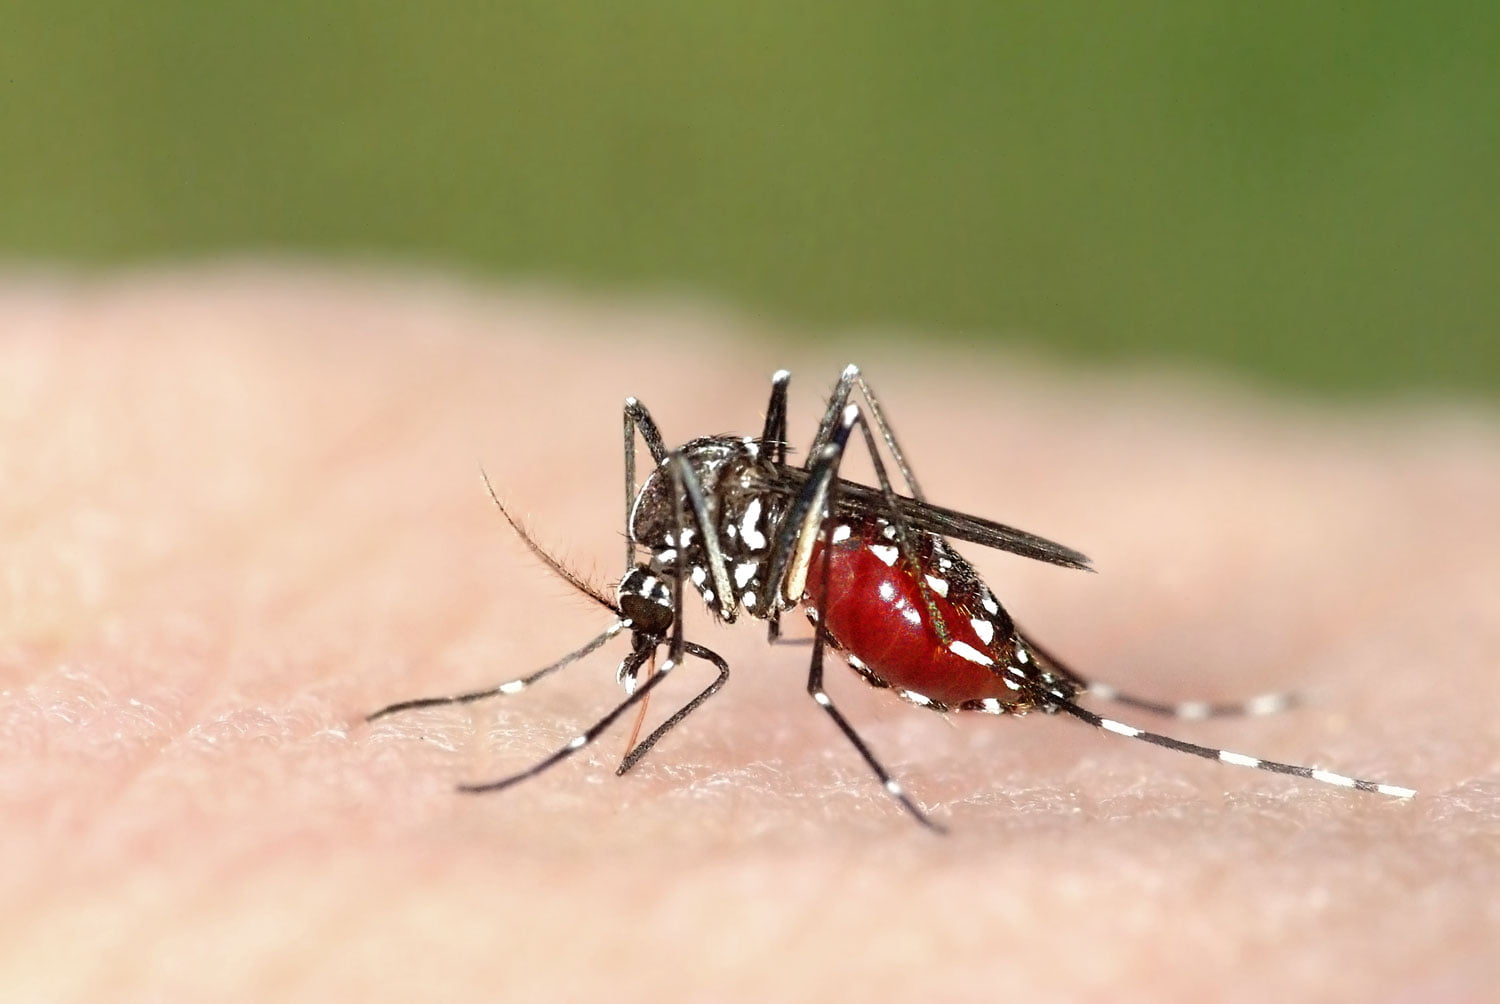 Are Mosquitoes Beneficial in Any Way?